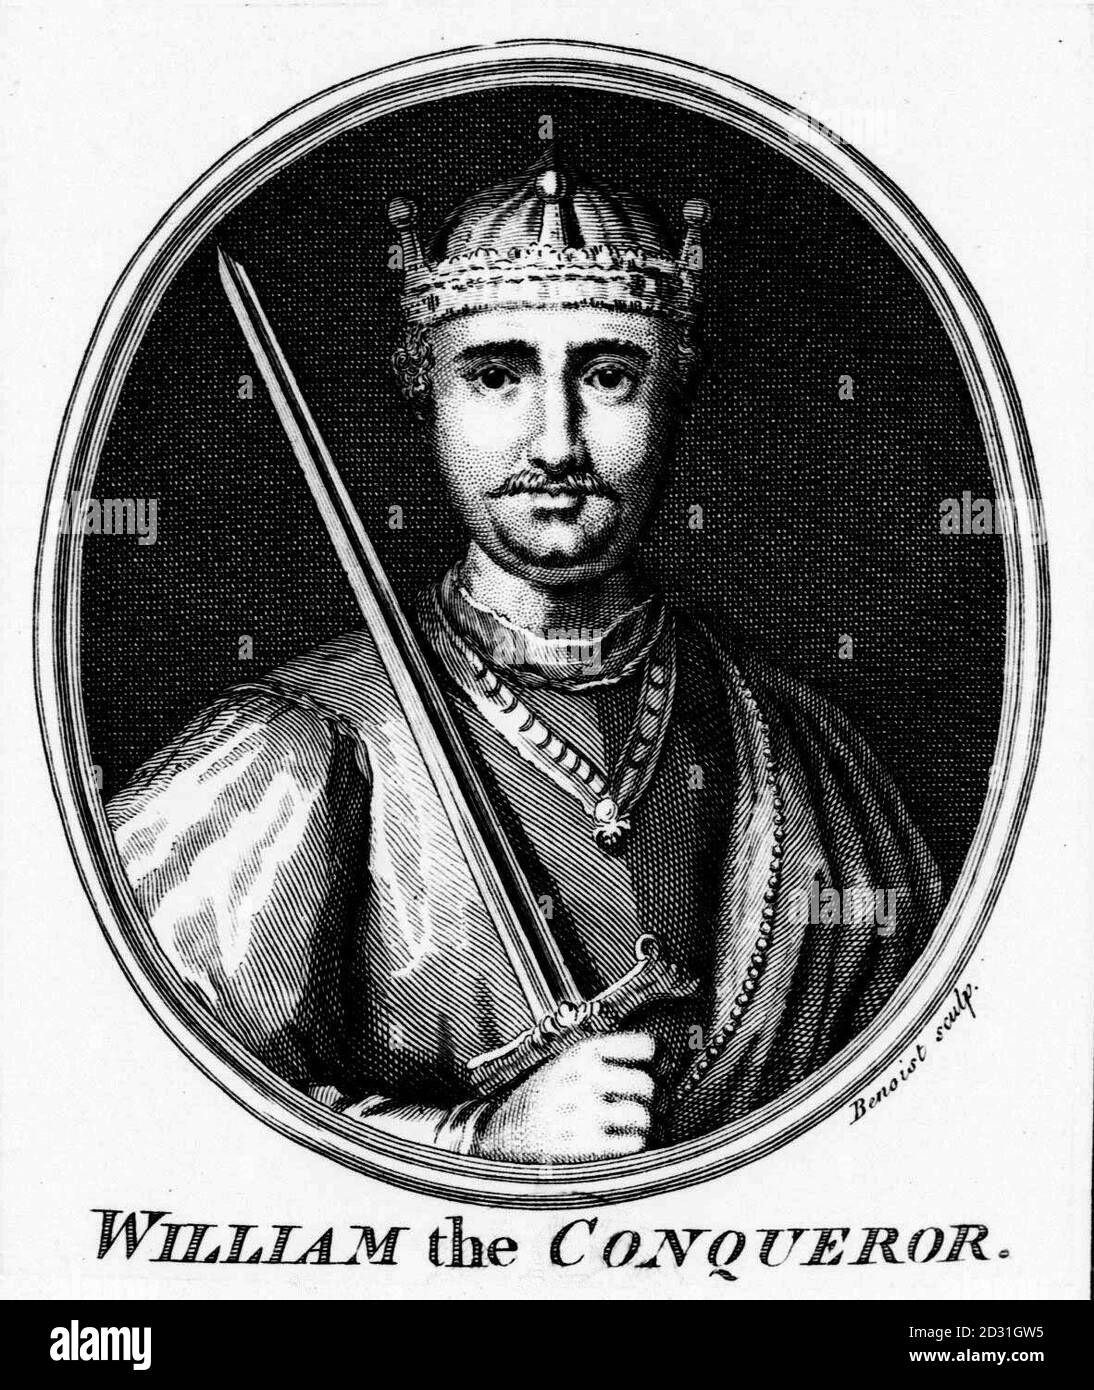 DECEMBER 25th:  An imaginary engraving of King William I of England (1066-1087). William, Duke of Normandy, became King of England after his defeat of the English King Harold at the Battle of Hastings in October 1066. He was crowned on Christmas Day 1066. Stock Photo